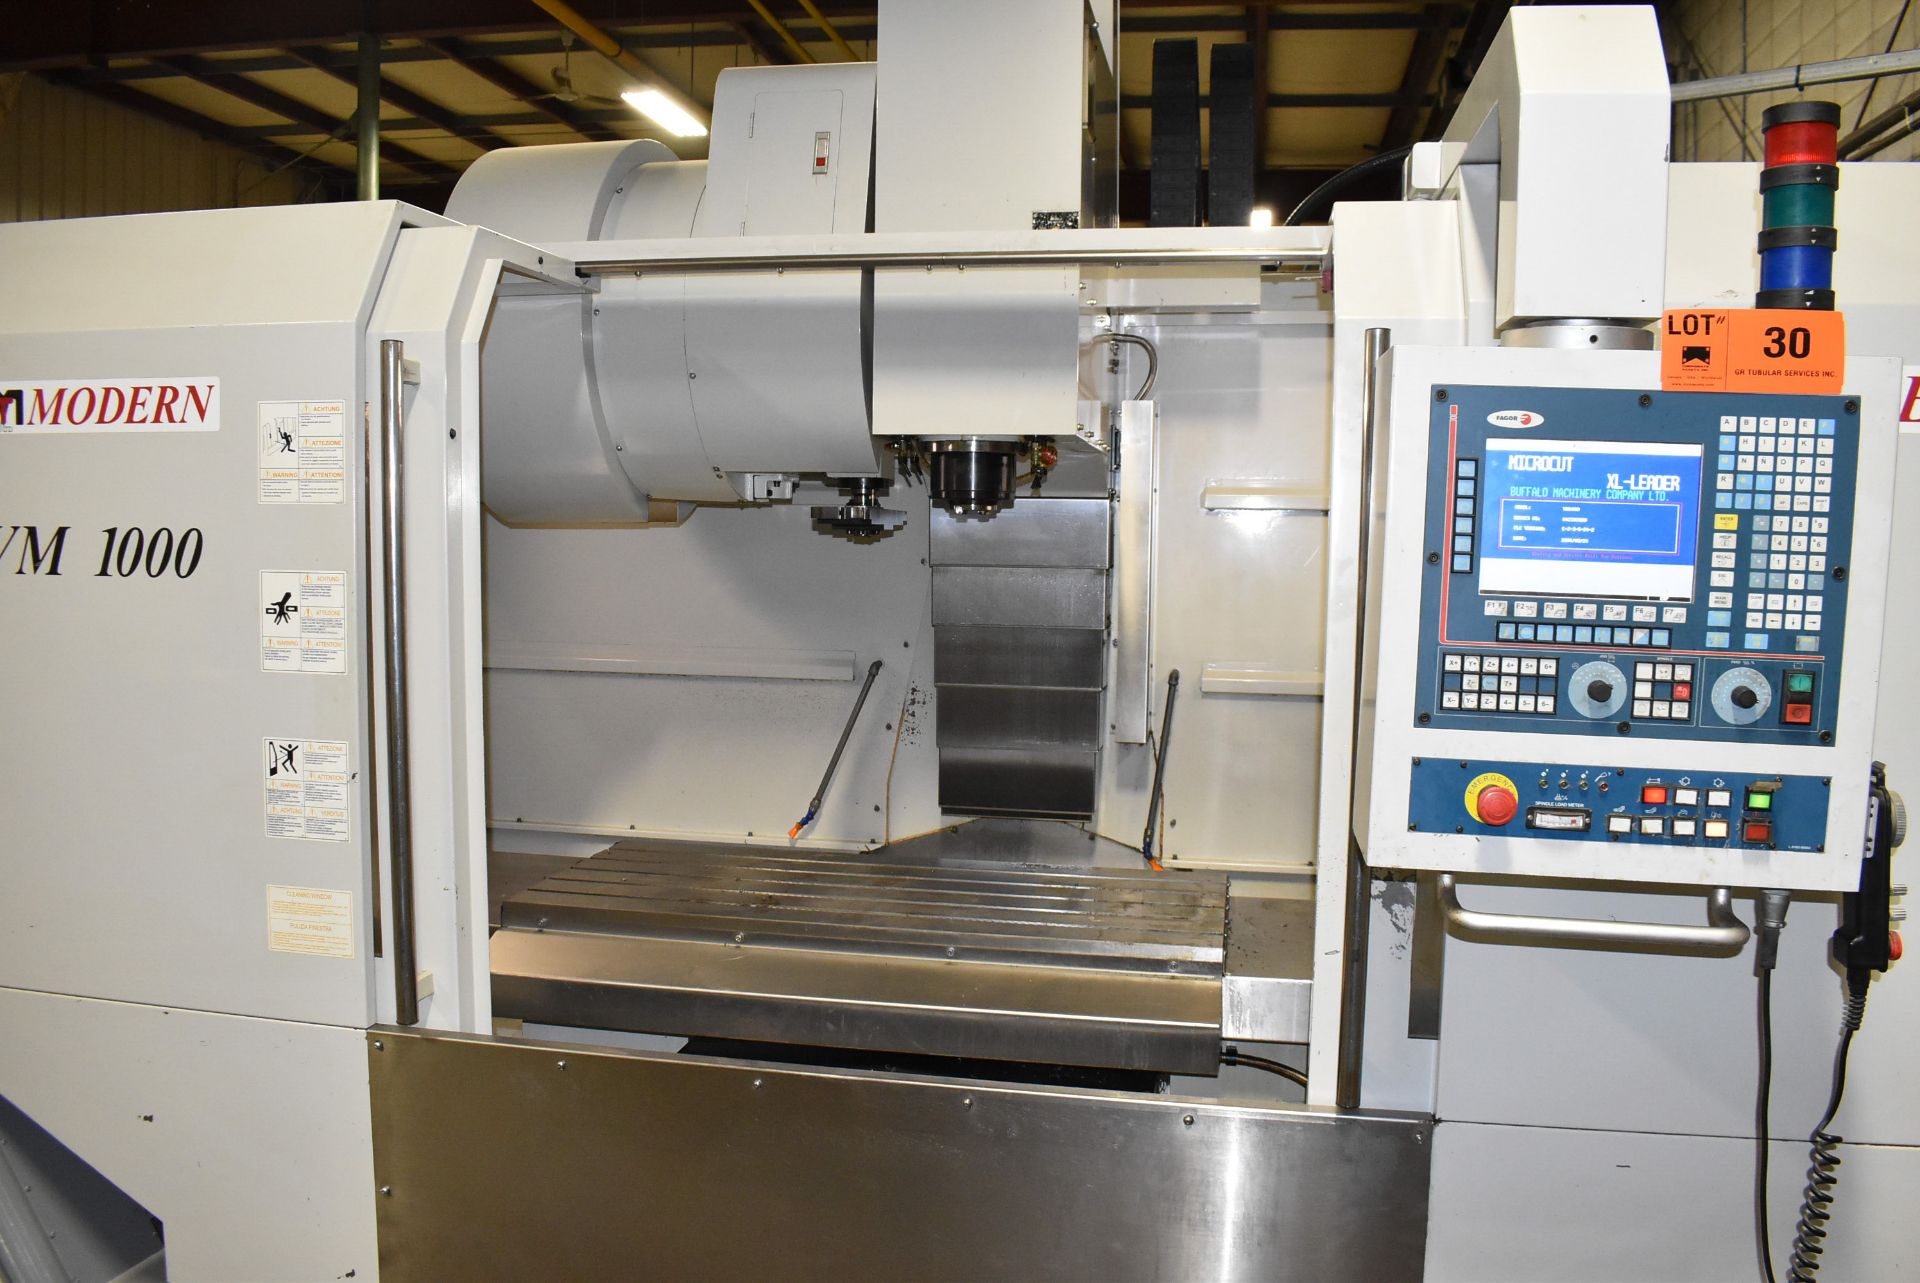 MODERN (2004) VM-1000 HIGH SPEED CNC VERTICAL MACHINING CENTER WITH FAGOR 8055M CNC CONTROL, 19" X - Image 3 of 23